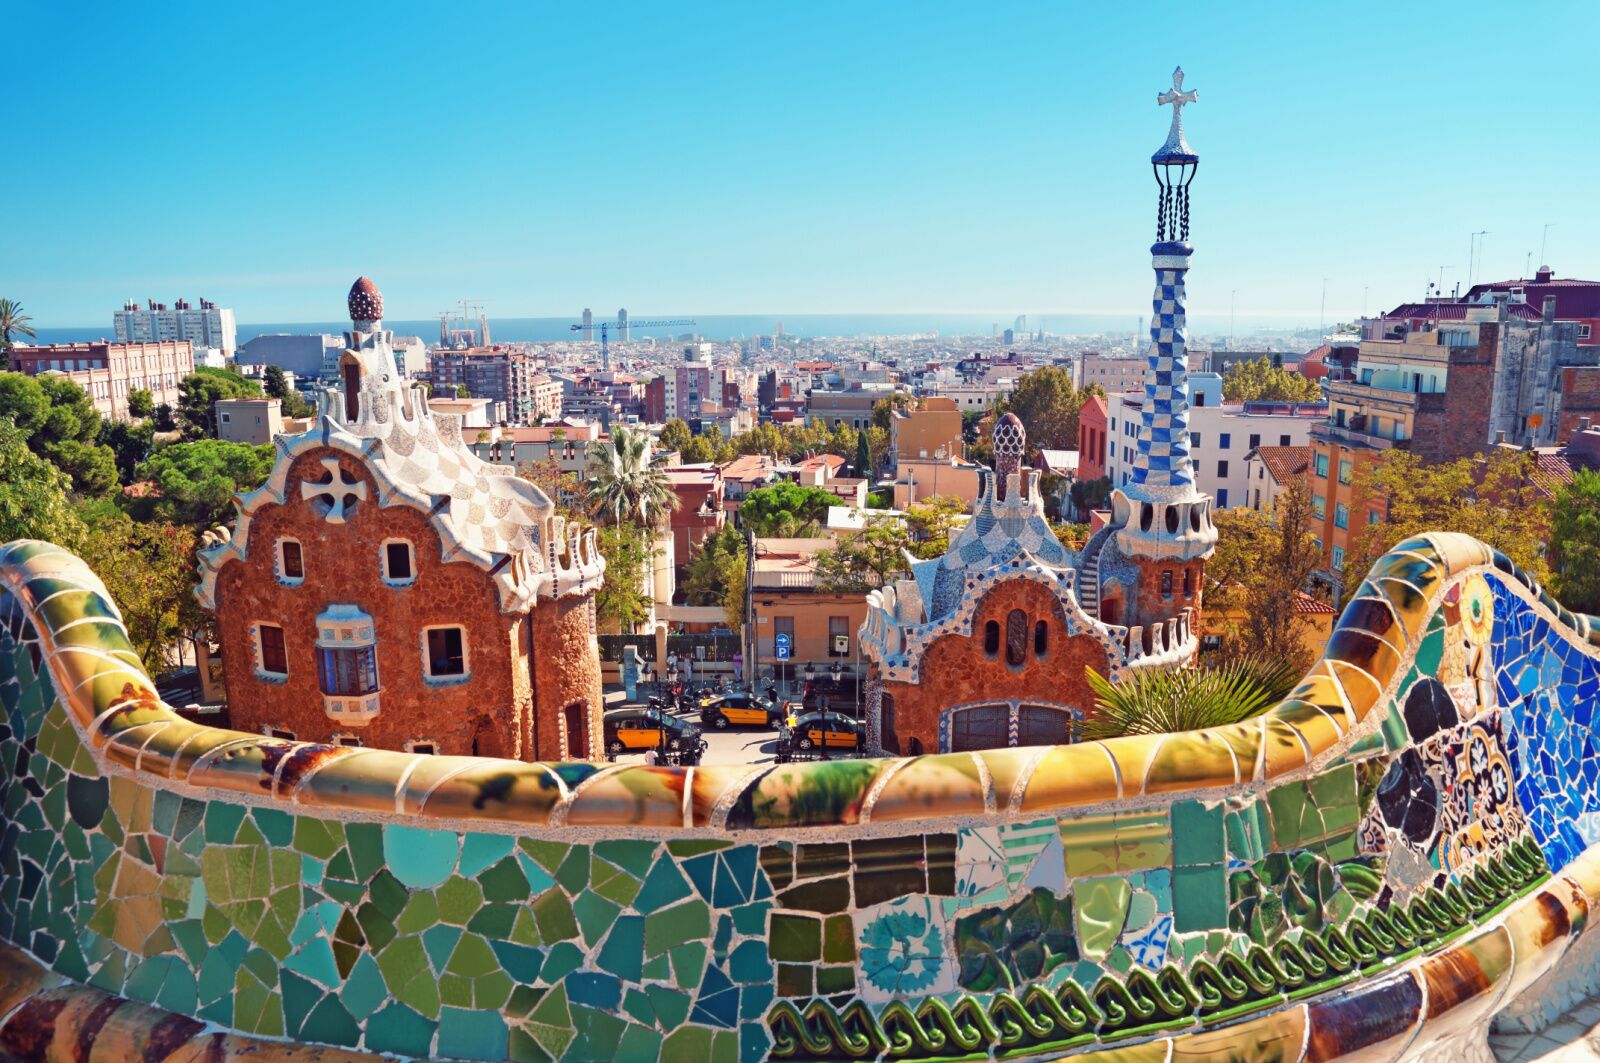 parc guell, one of the best parks in barcelona and all of europe